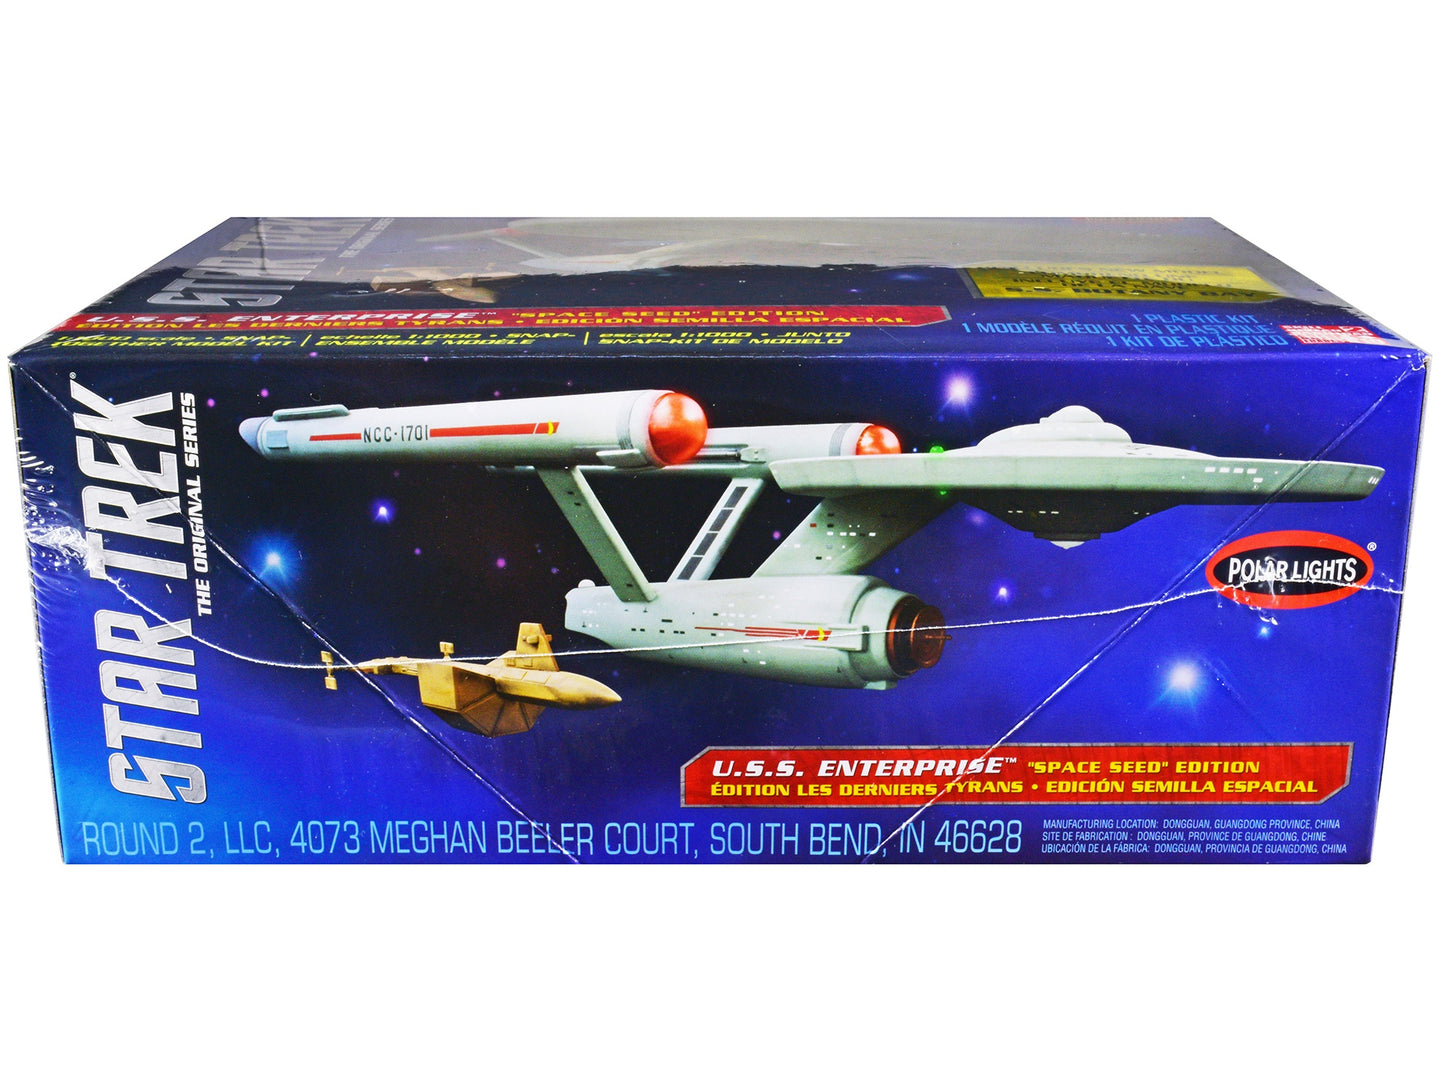 Skill 2 Model Kit Star Trek U.S.S. Enterprise and S.S. Botany Bay "The Original Series" "Space Seed" Edition Snap-Together 1/1000 Scale Model by Polar Lights